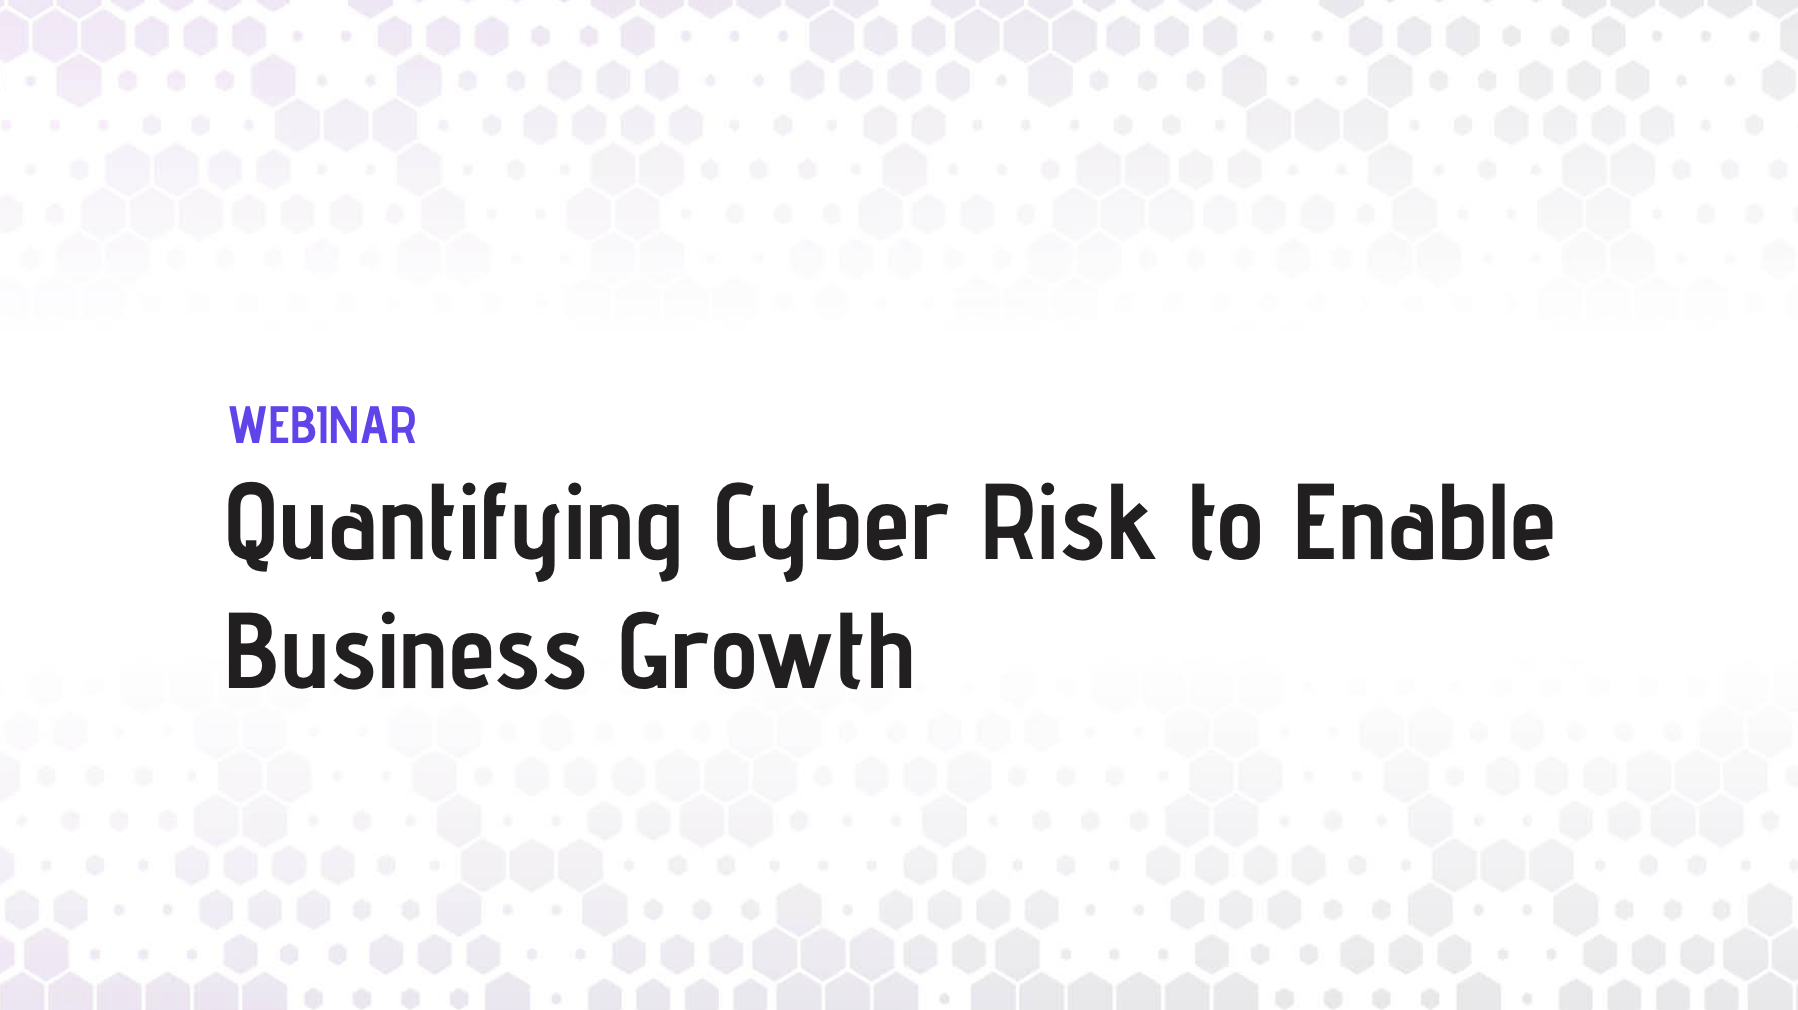 Quantifying Cyber Risk to Enable Business Growth